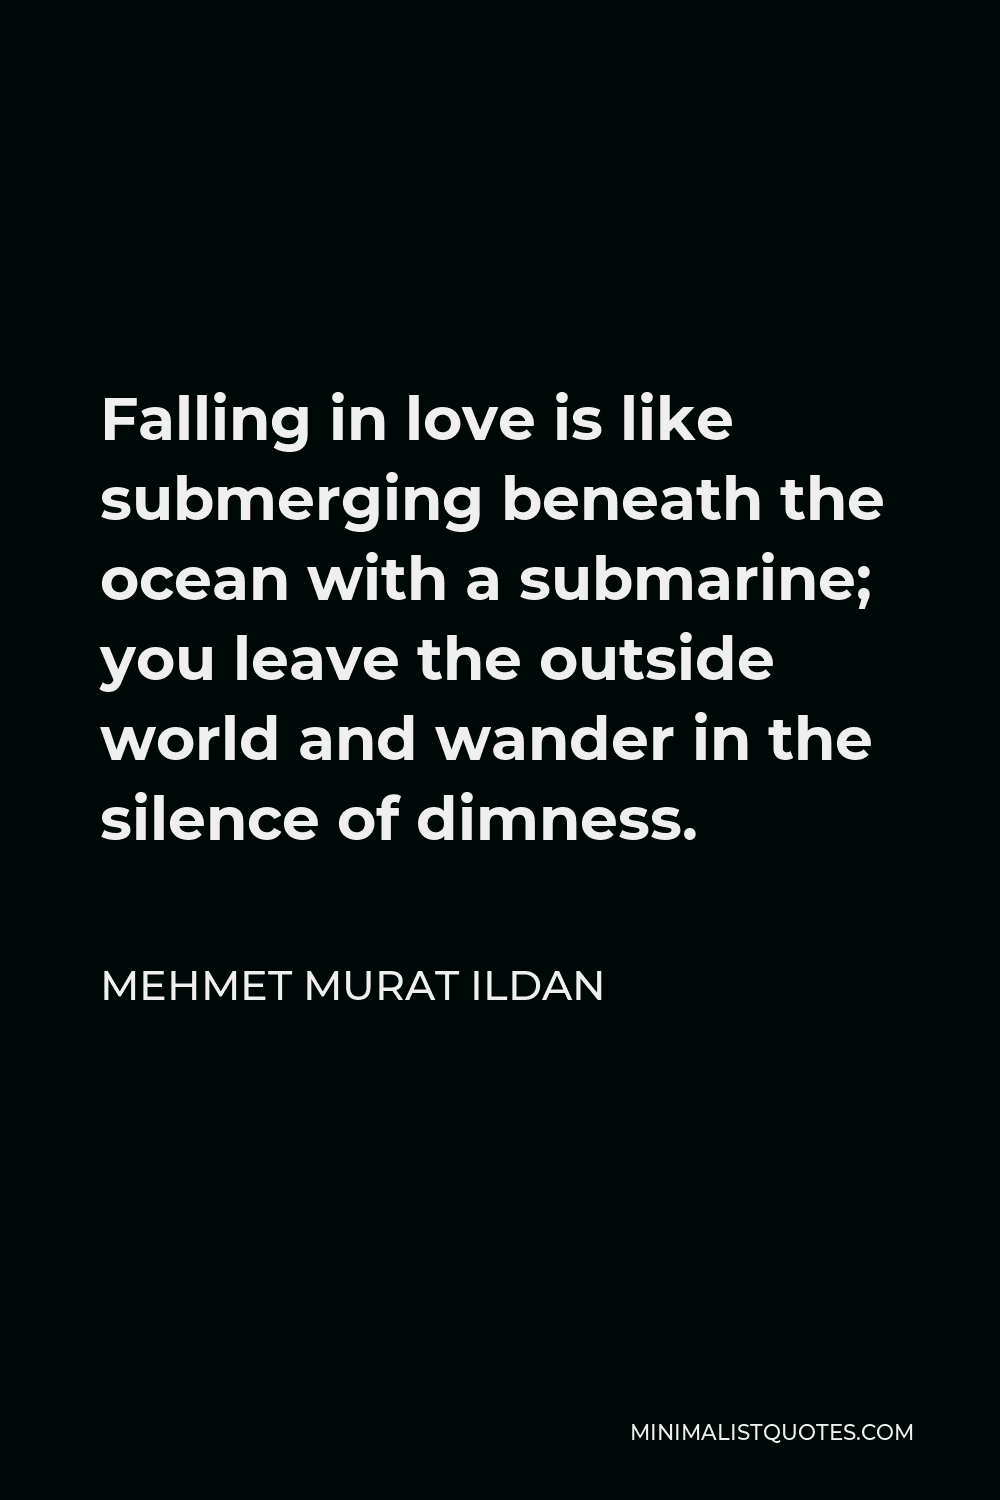 Mehmet Murat Ildan Quote - Falling in love is like submerging beneath the ocean with a submarine; you leave the outside world and wander in the silence of dimness.